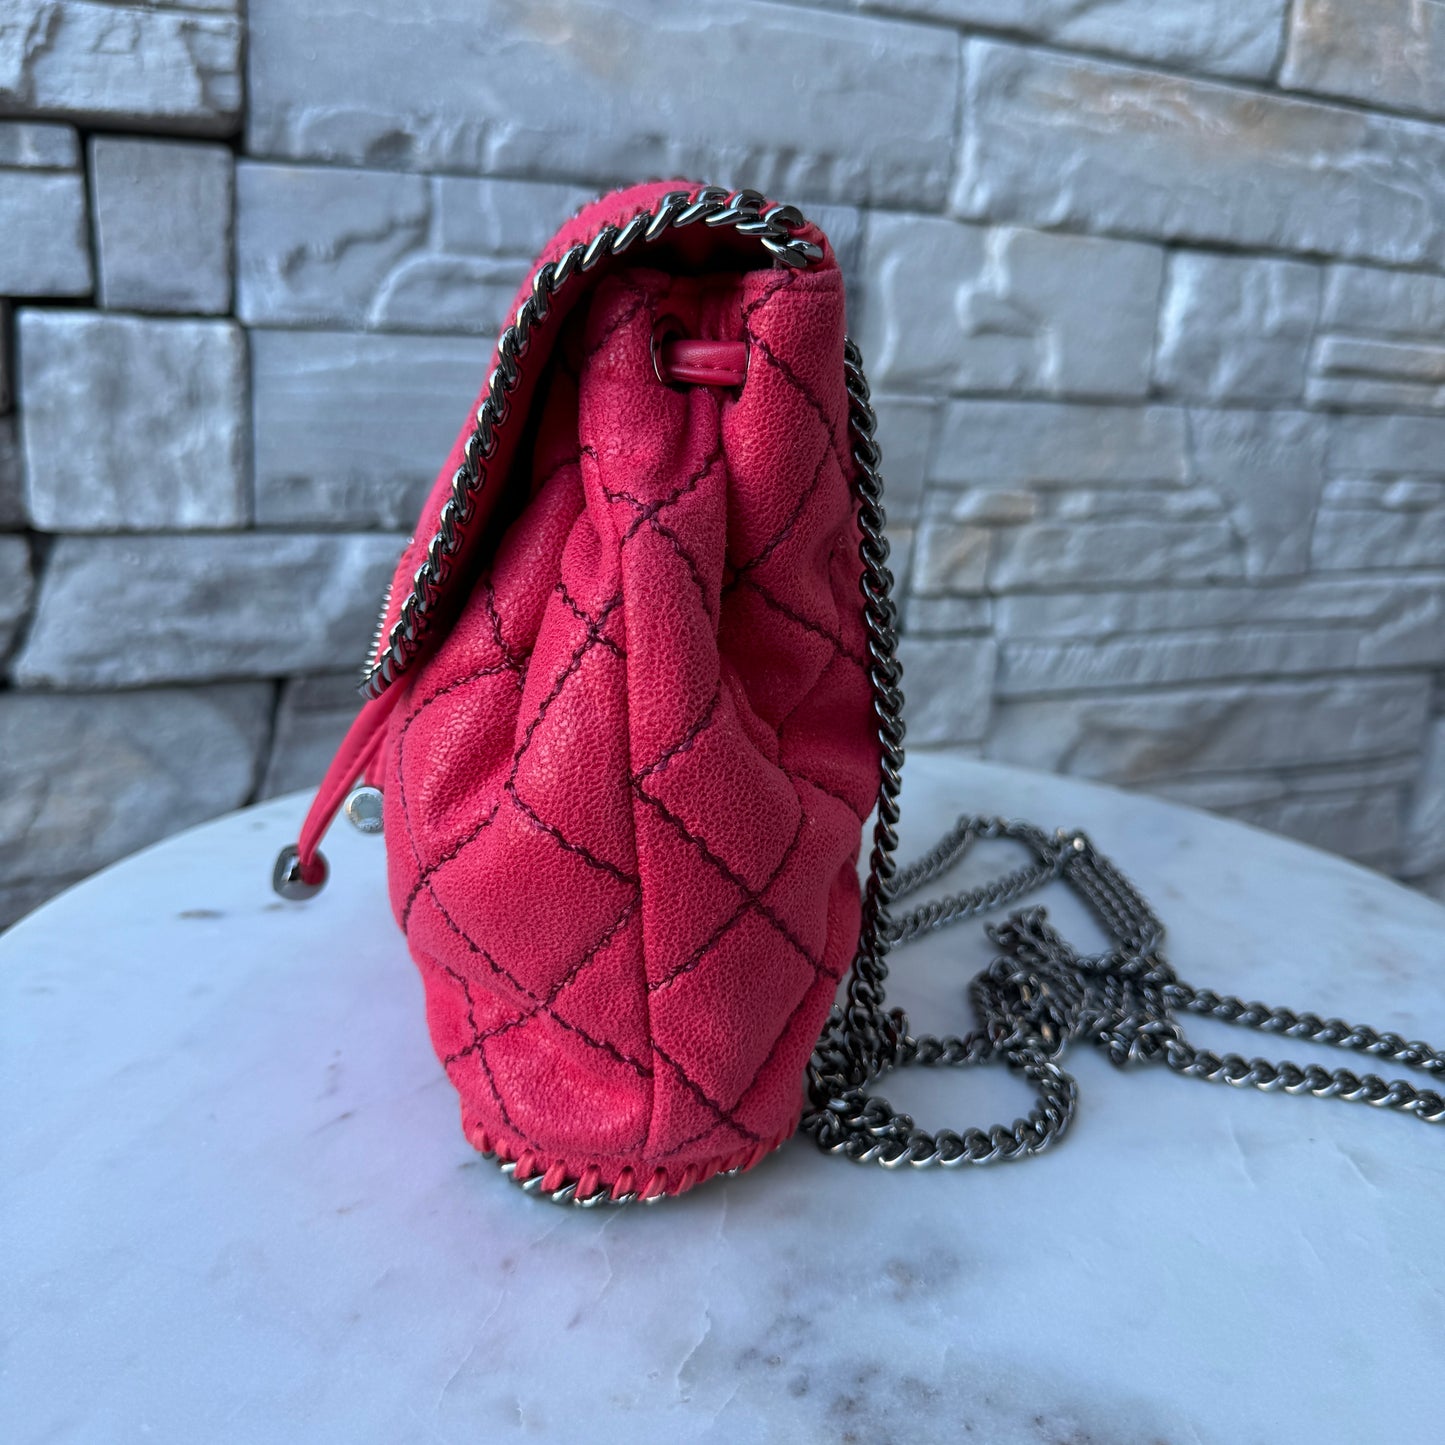 Stella McCartney Shaggy Deer Quilted Mini Falabella Backpack